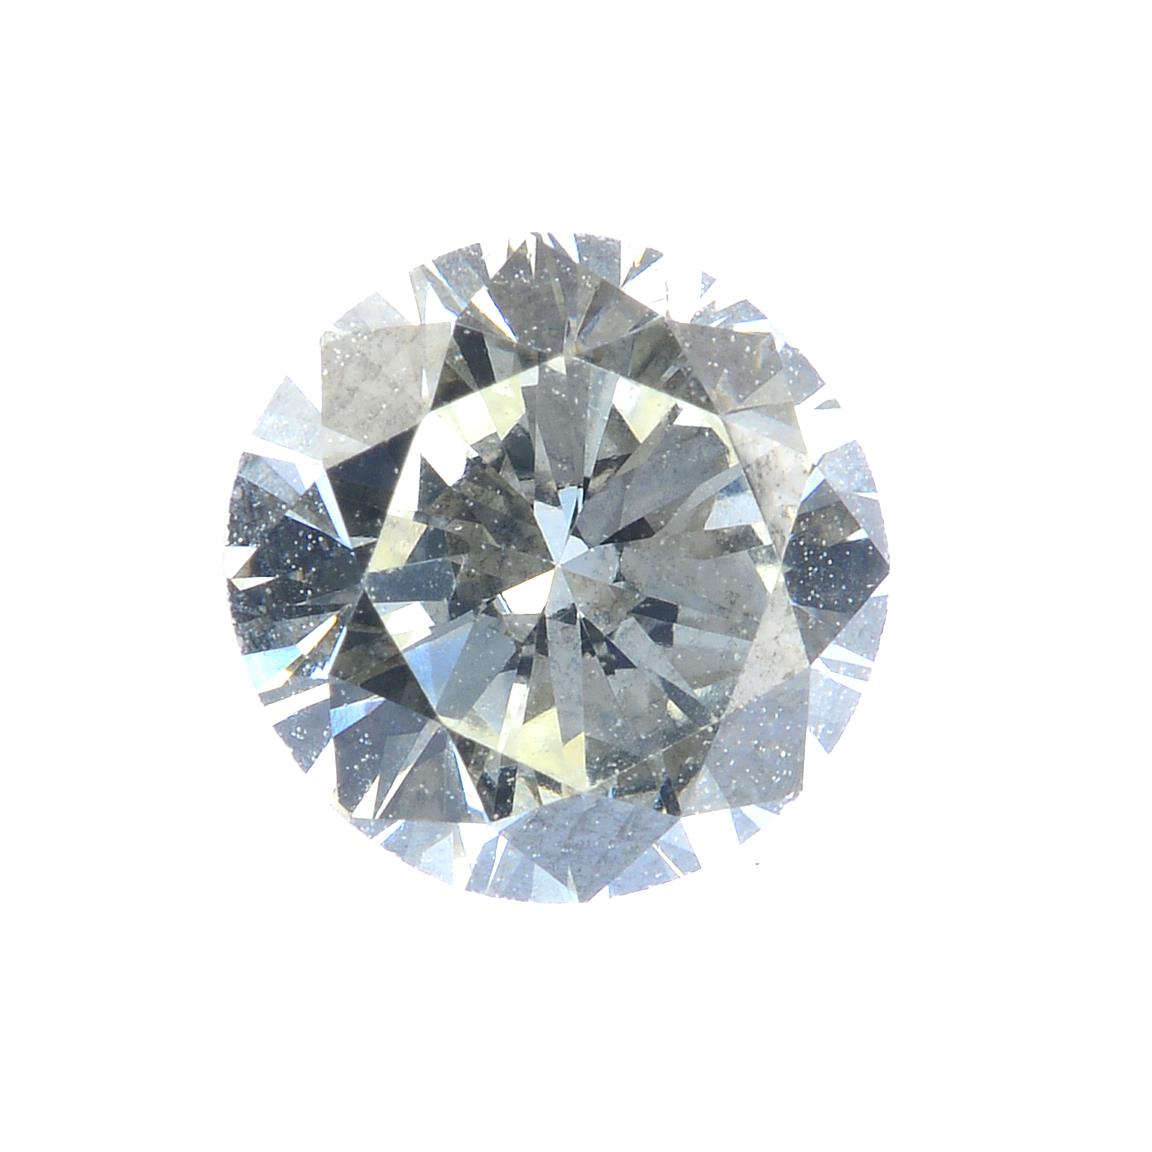 A brilliant-cut diamond, weighing 0.78ct. Estimated J-K colour, VS clarity. PLEASE NOTE THIS LOT